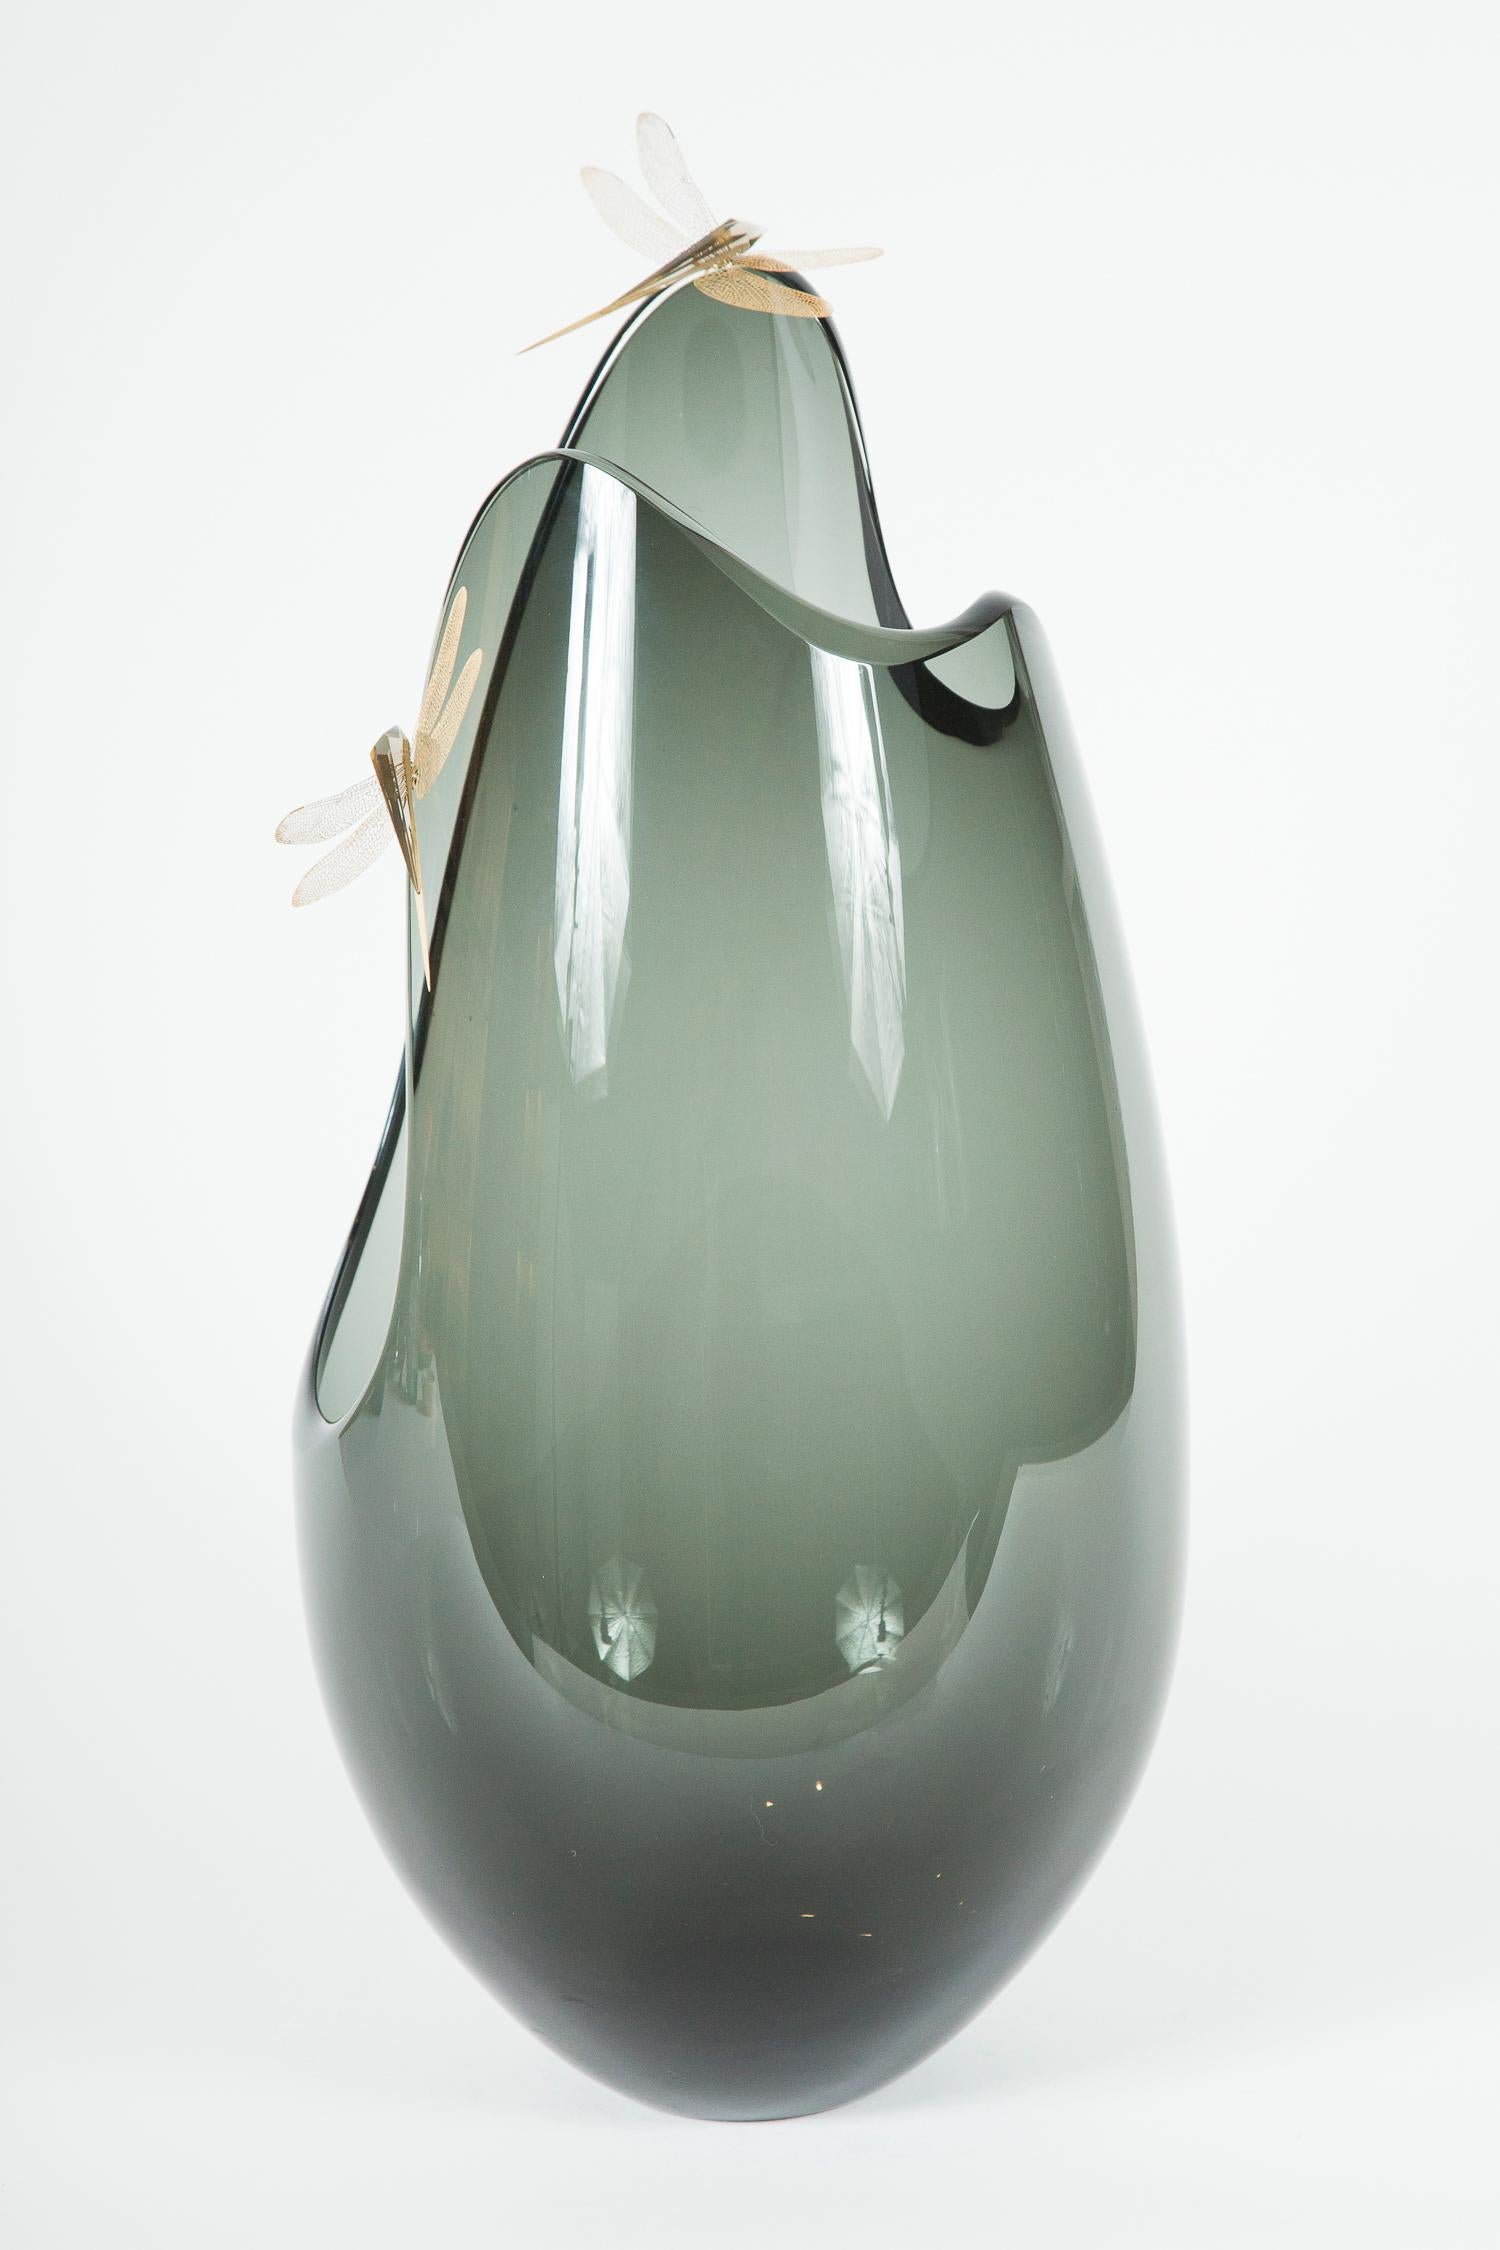 Contemporary Fen III, a unique smokey grey glass sculpture with dragonflies by Hanne Enemark